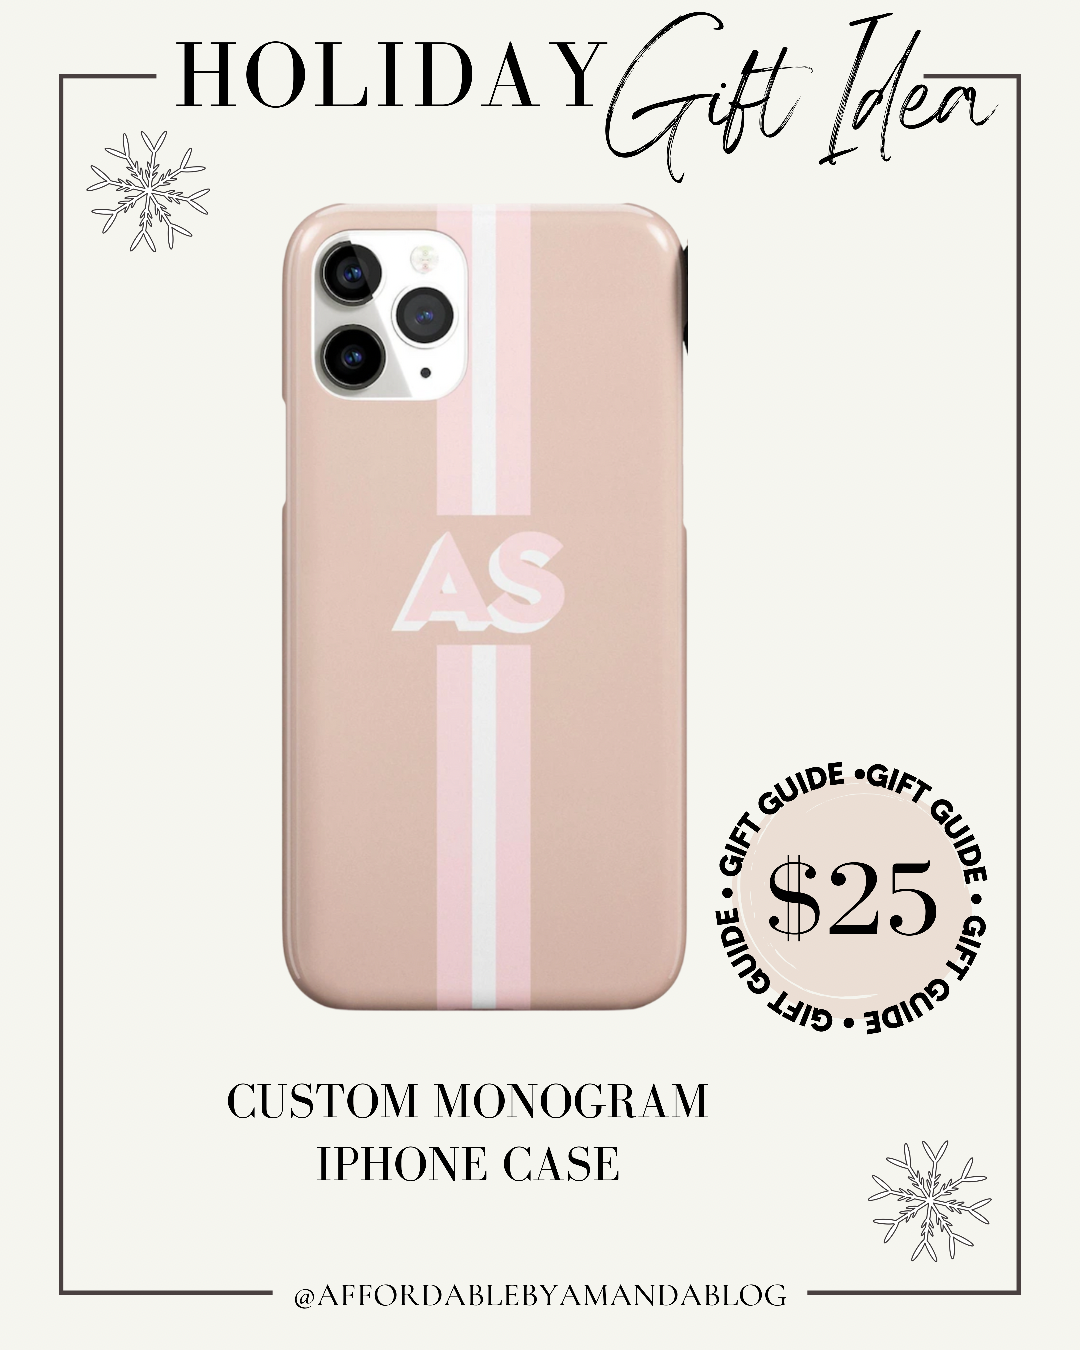 10 Gifts Under $100 - ETSY Personalized Monogram iPhone Case - Holiday Gift Guide for Her - Affordable by Amanda